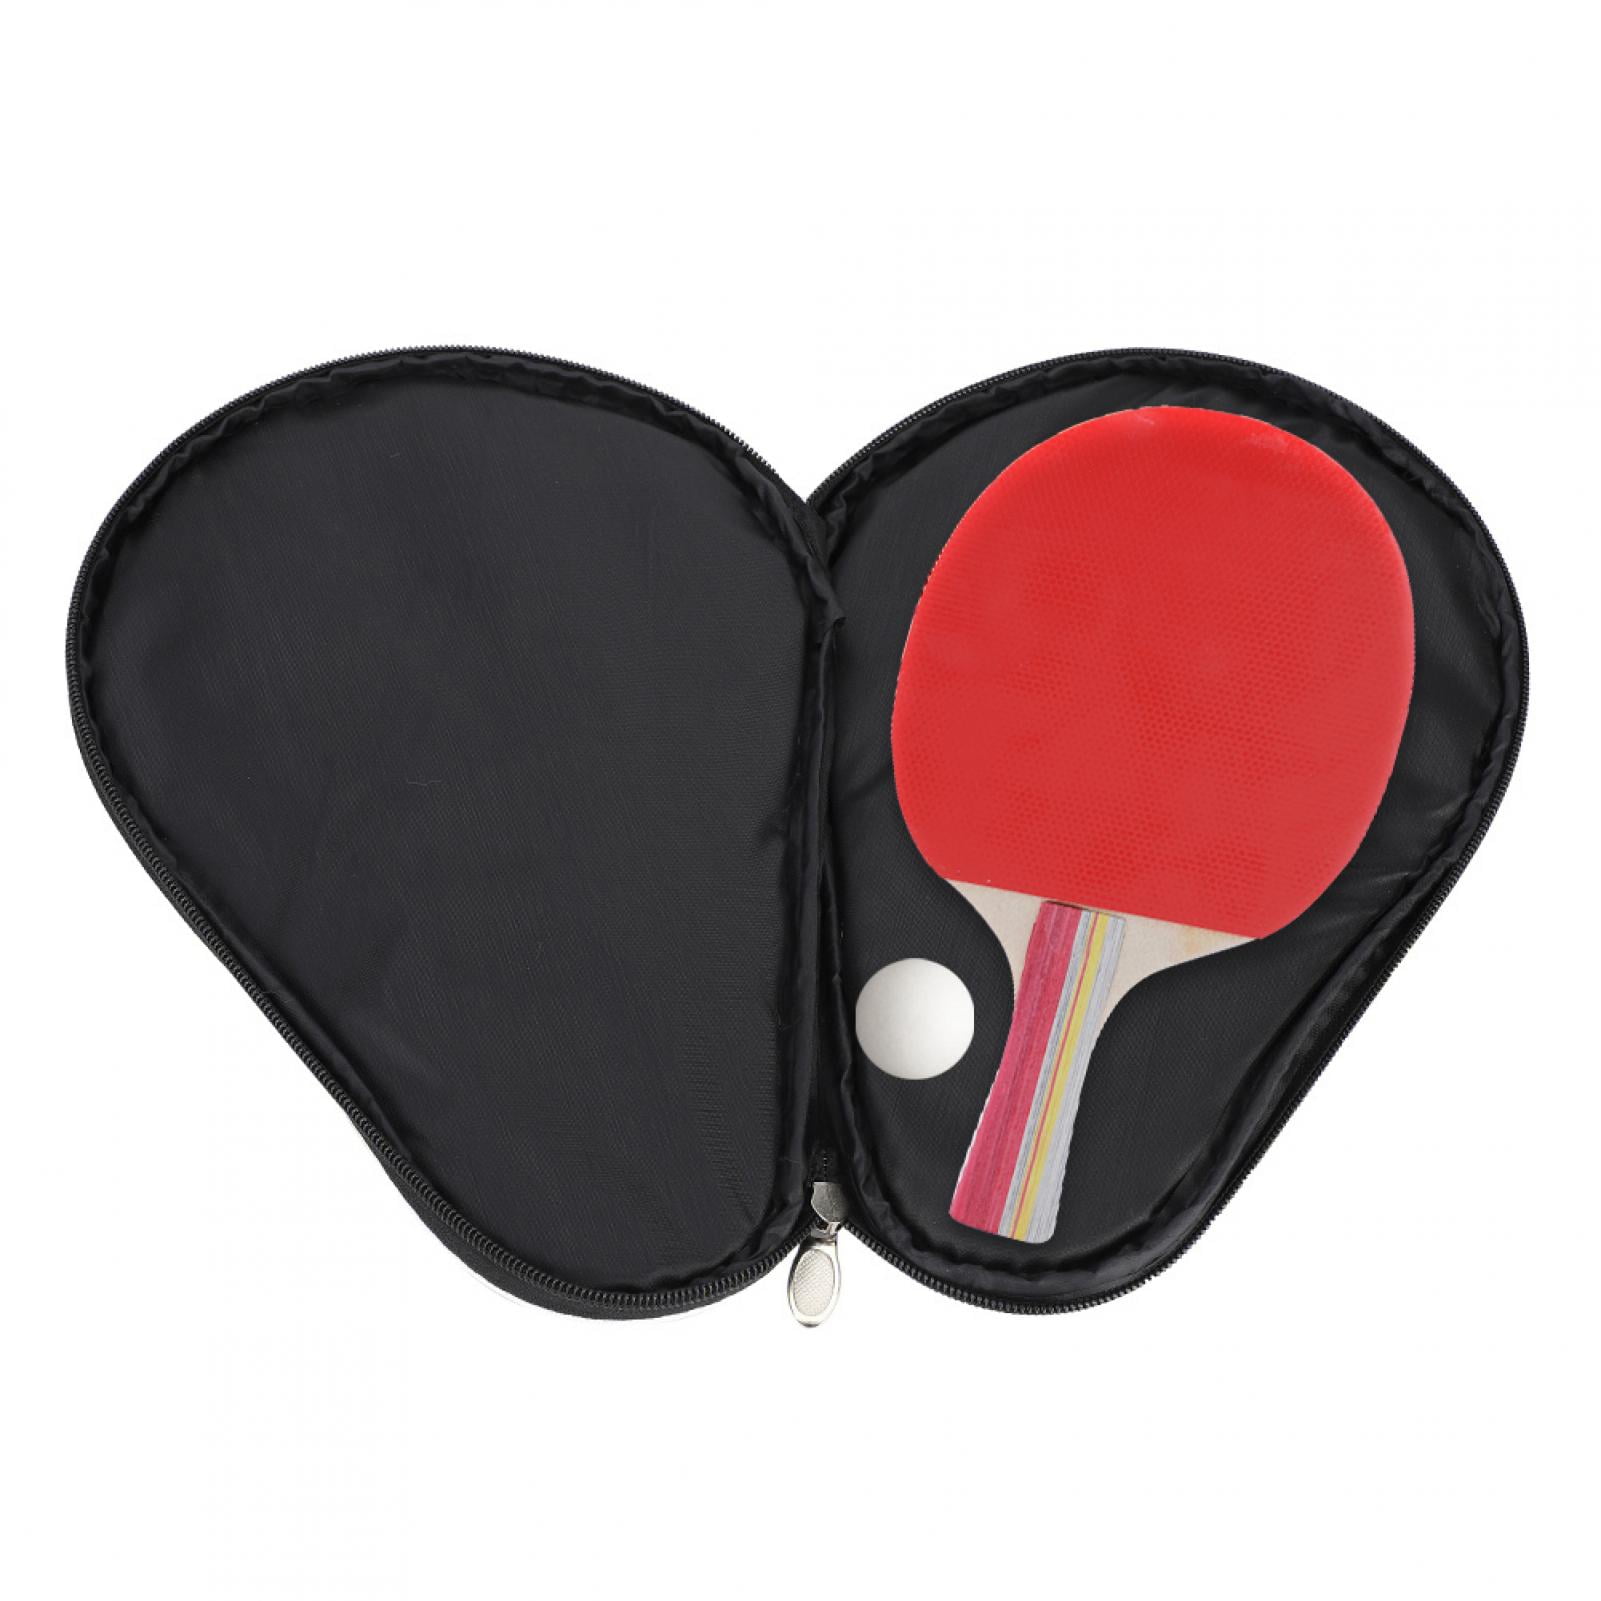 Paddle Bat Edge Tape Side Tape Table Tennis Racket Case Bag with Zipper 